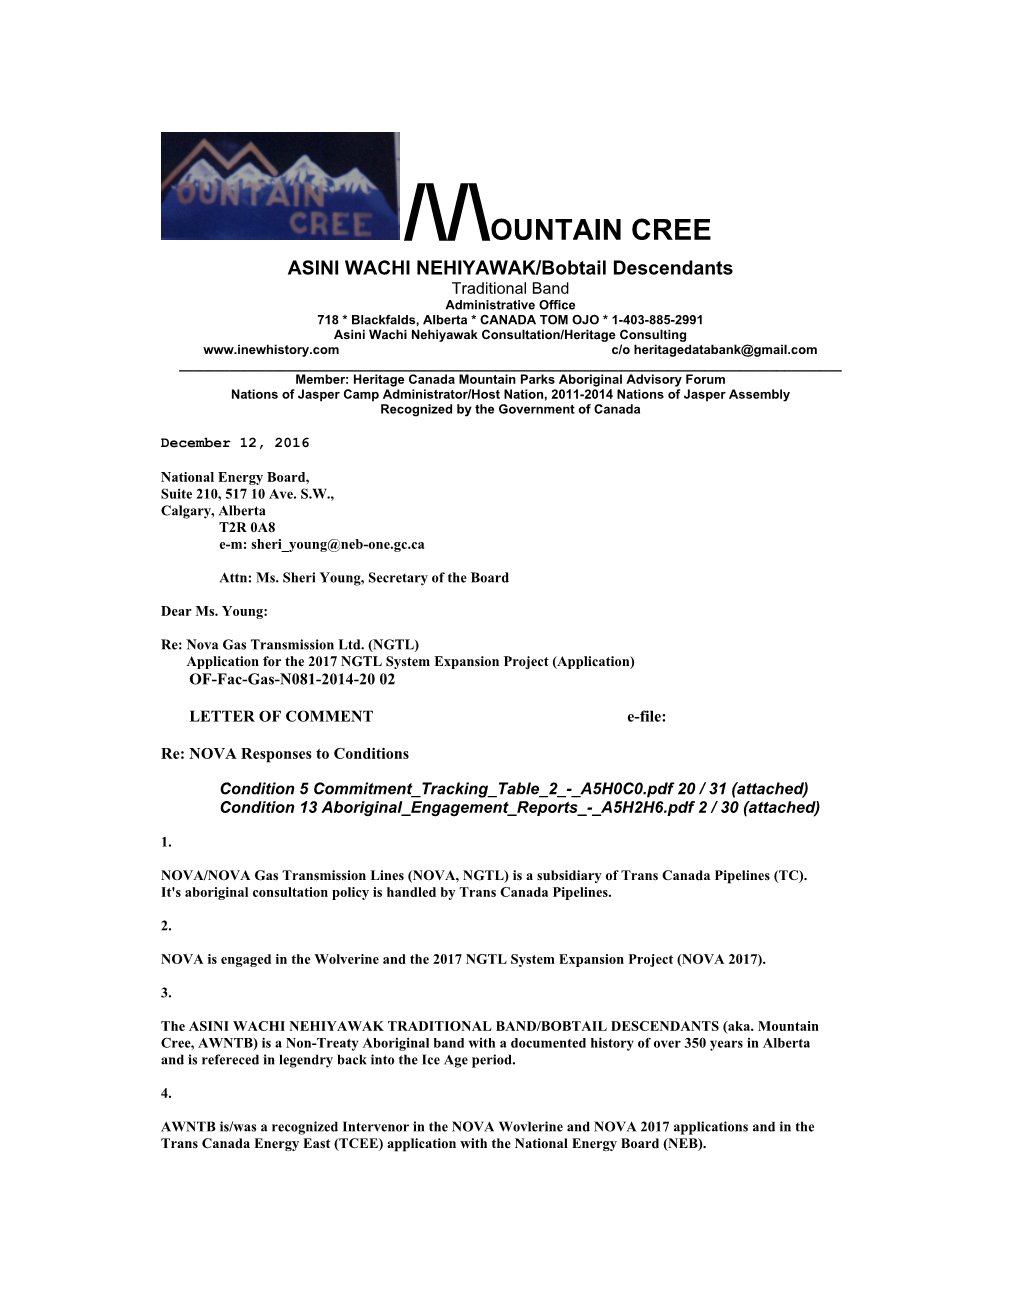 MOUNTAIN CREE Position Paper NOVA GAS TRANSMISSION LTD. 2017 System Expansion Project National Energy Board Hearings 2015